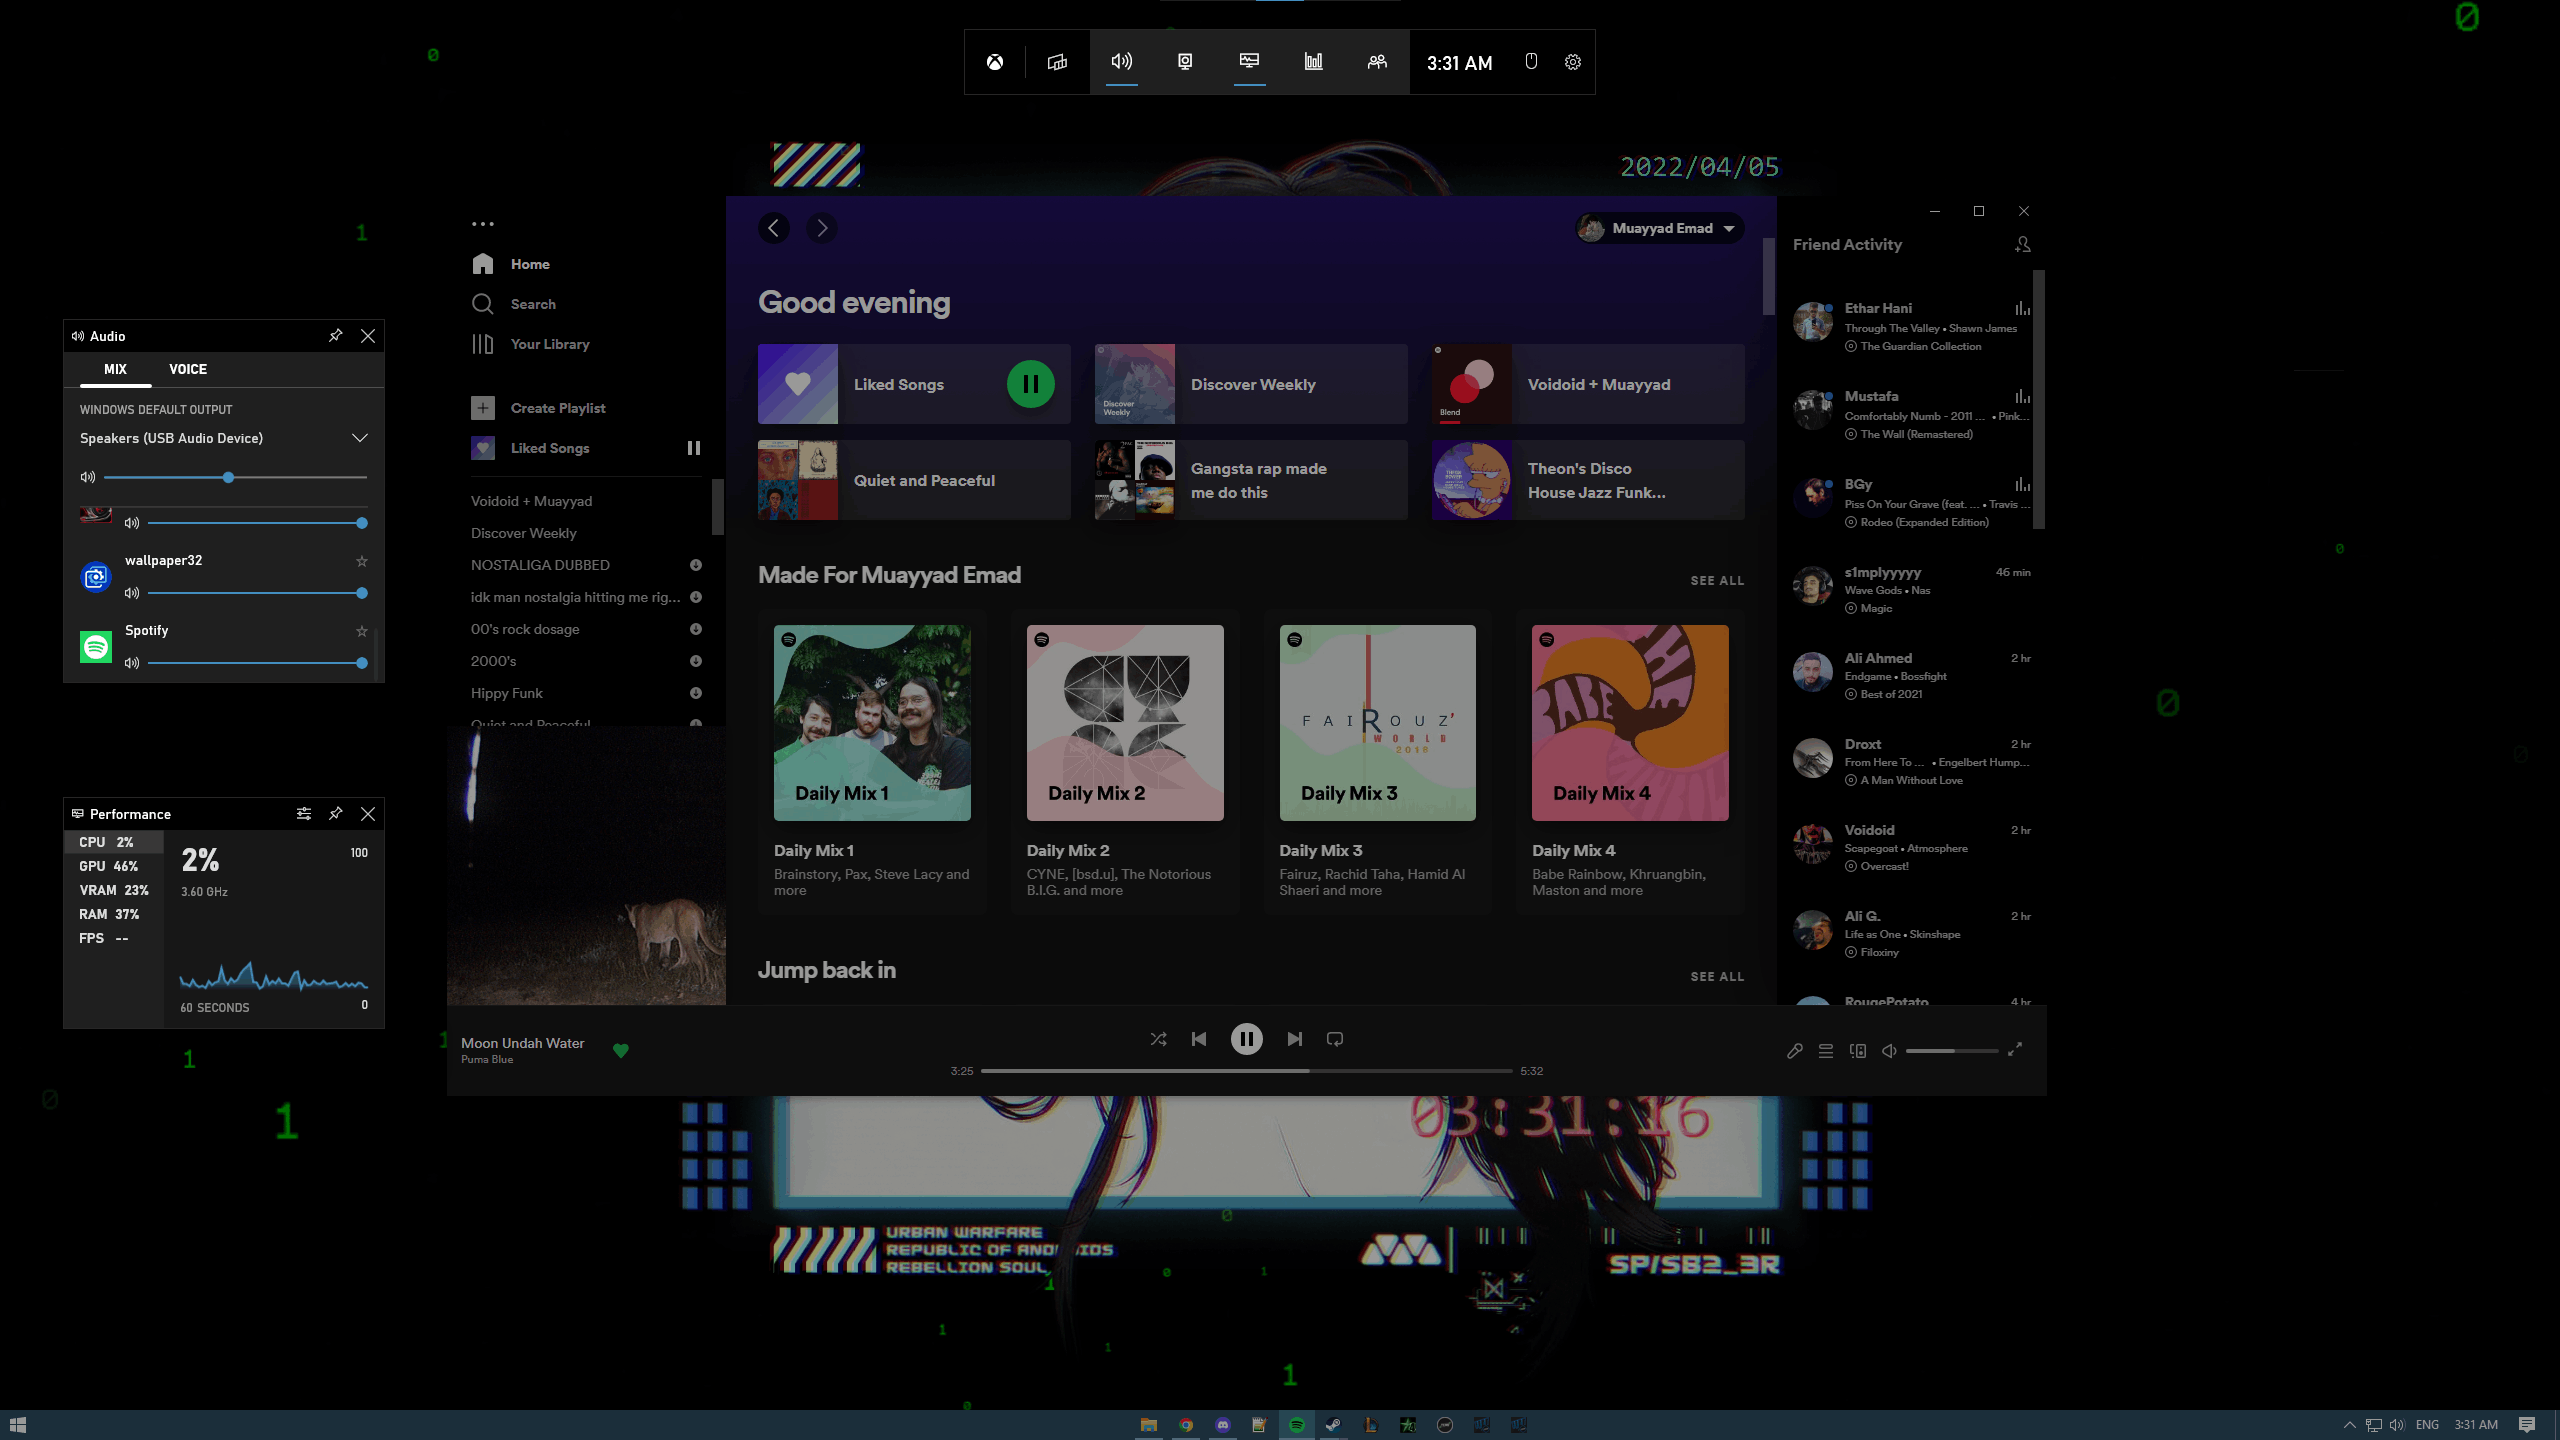 Mac] Now Playing widget not displaying correctly  - The Spotify Community